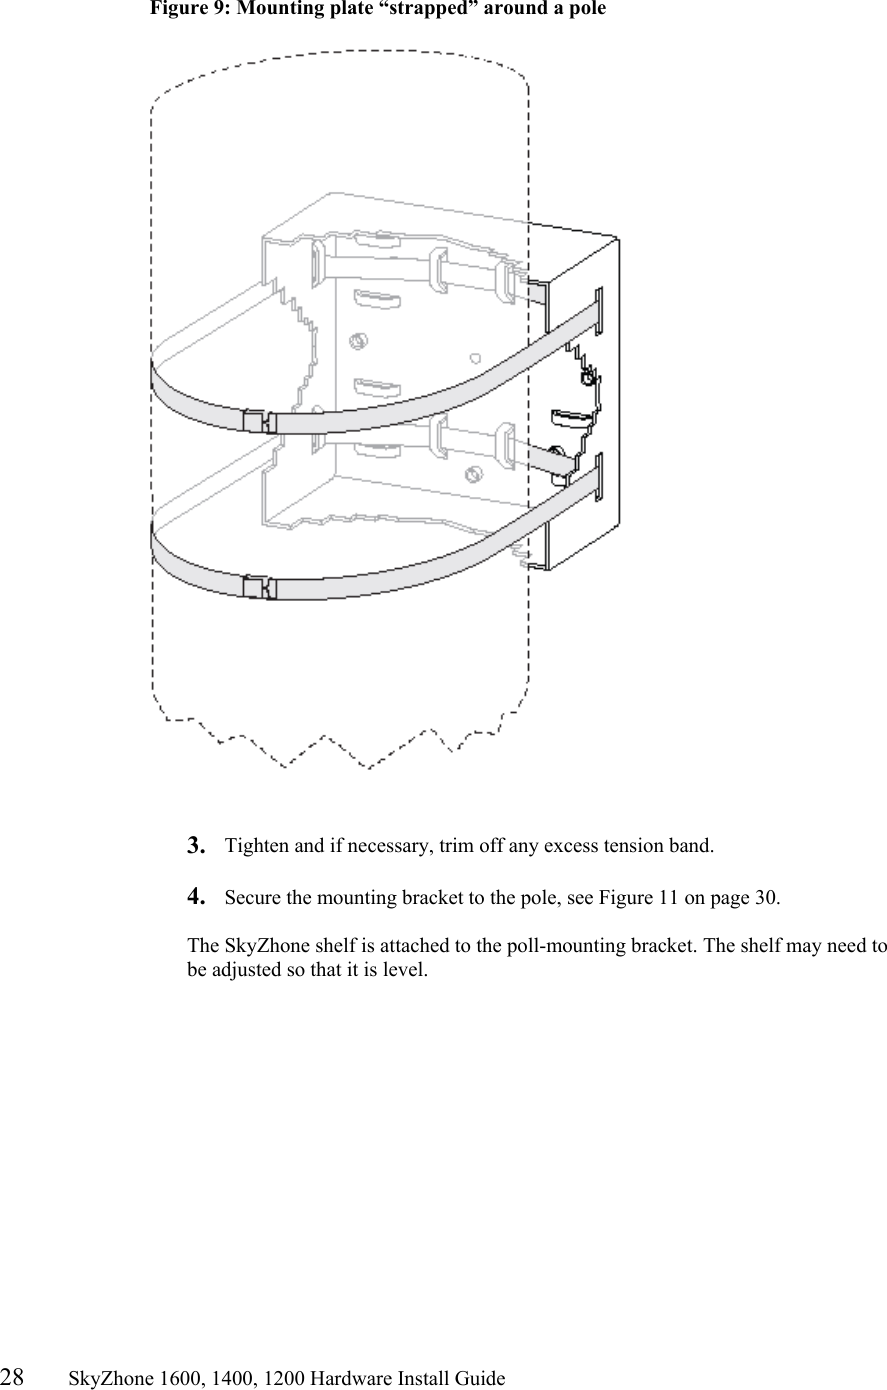 28       SkyZhone 1600, 1400, 1200 Hardware Install Guide           Figure 9: Mounting plate “strapped” around a pole     3.  Tighten and if necessary, trim off any excess tension band.  4.  Secure the mounting bracket to the pole, see Figure 11 on page 30.  The SkyZhone shelf is attached to the poll-mounting bracket. The shelf may need to be adjusted so that it is level.  